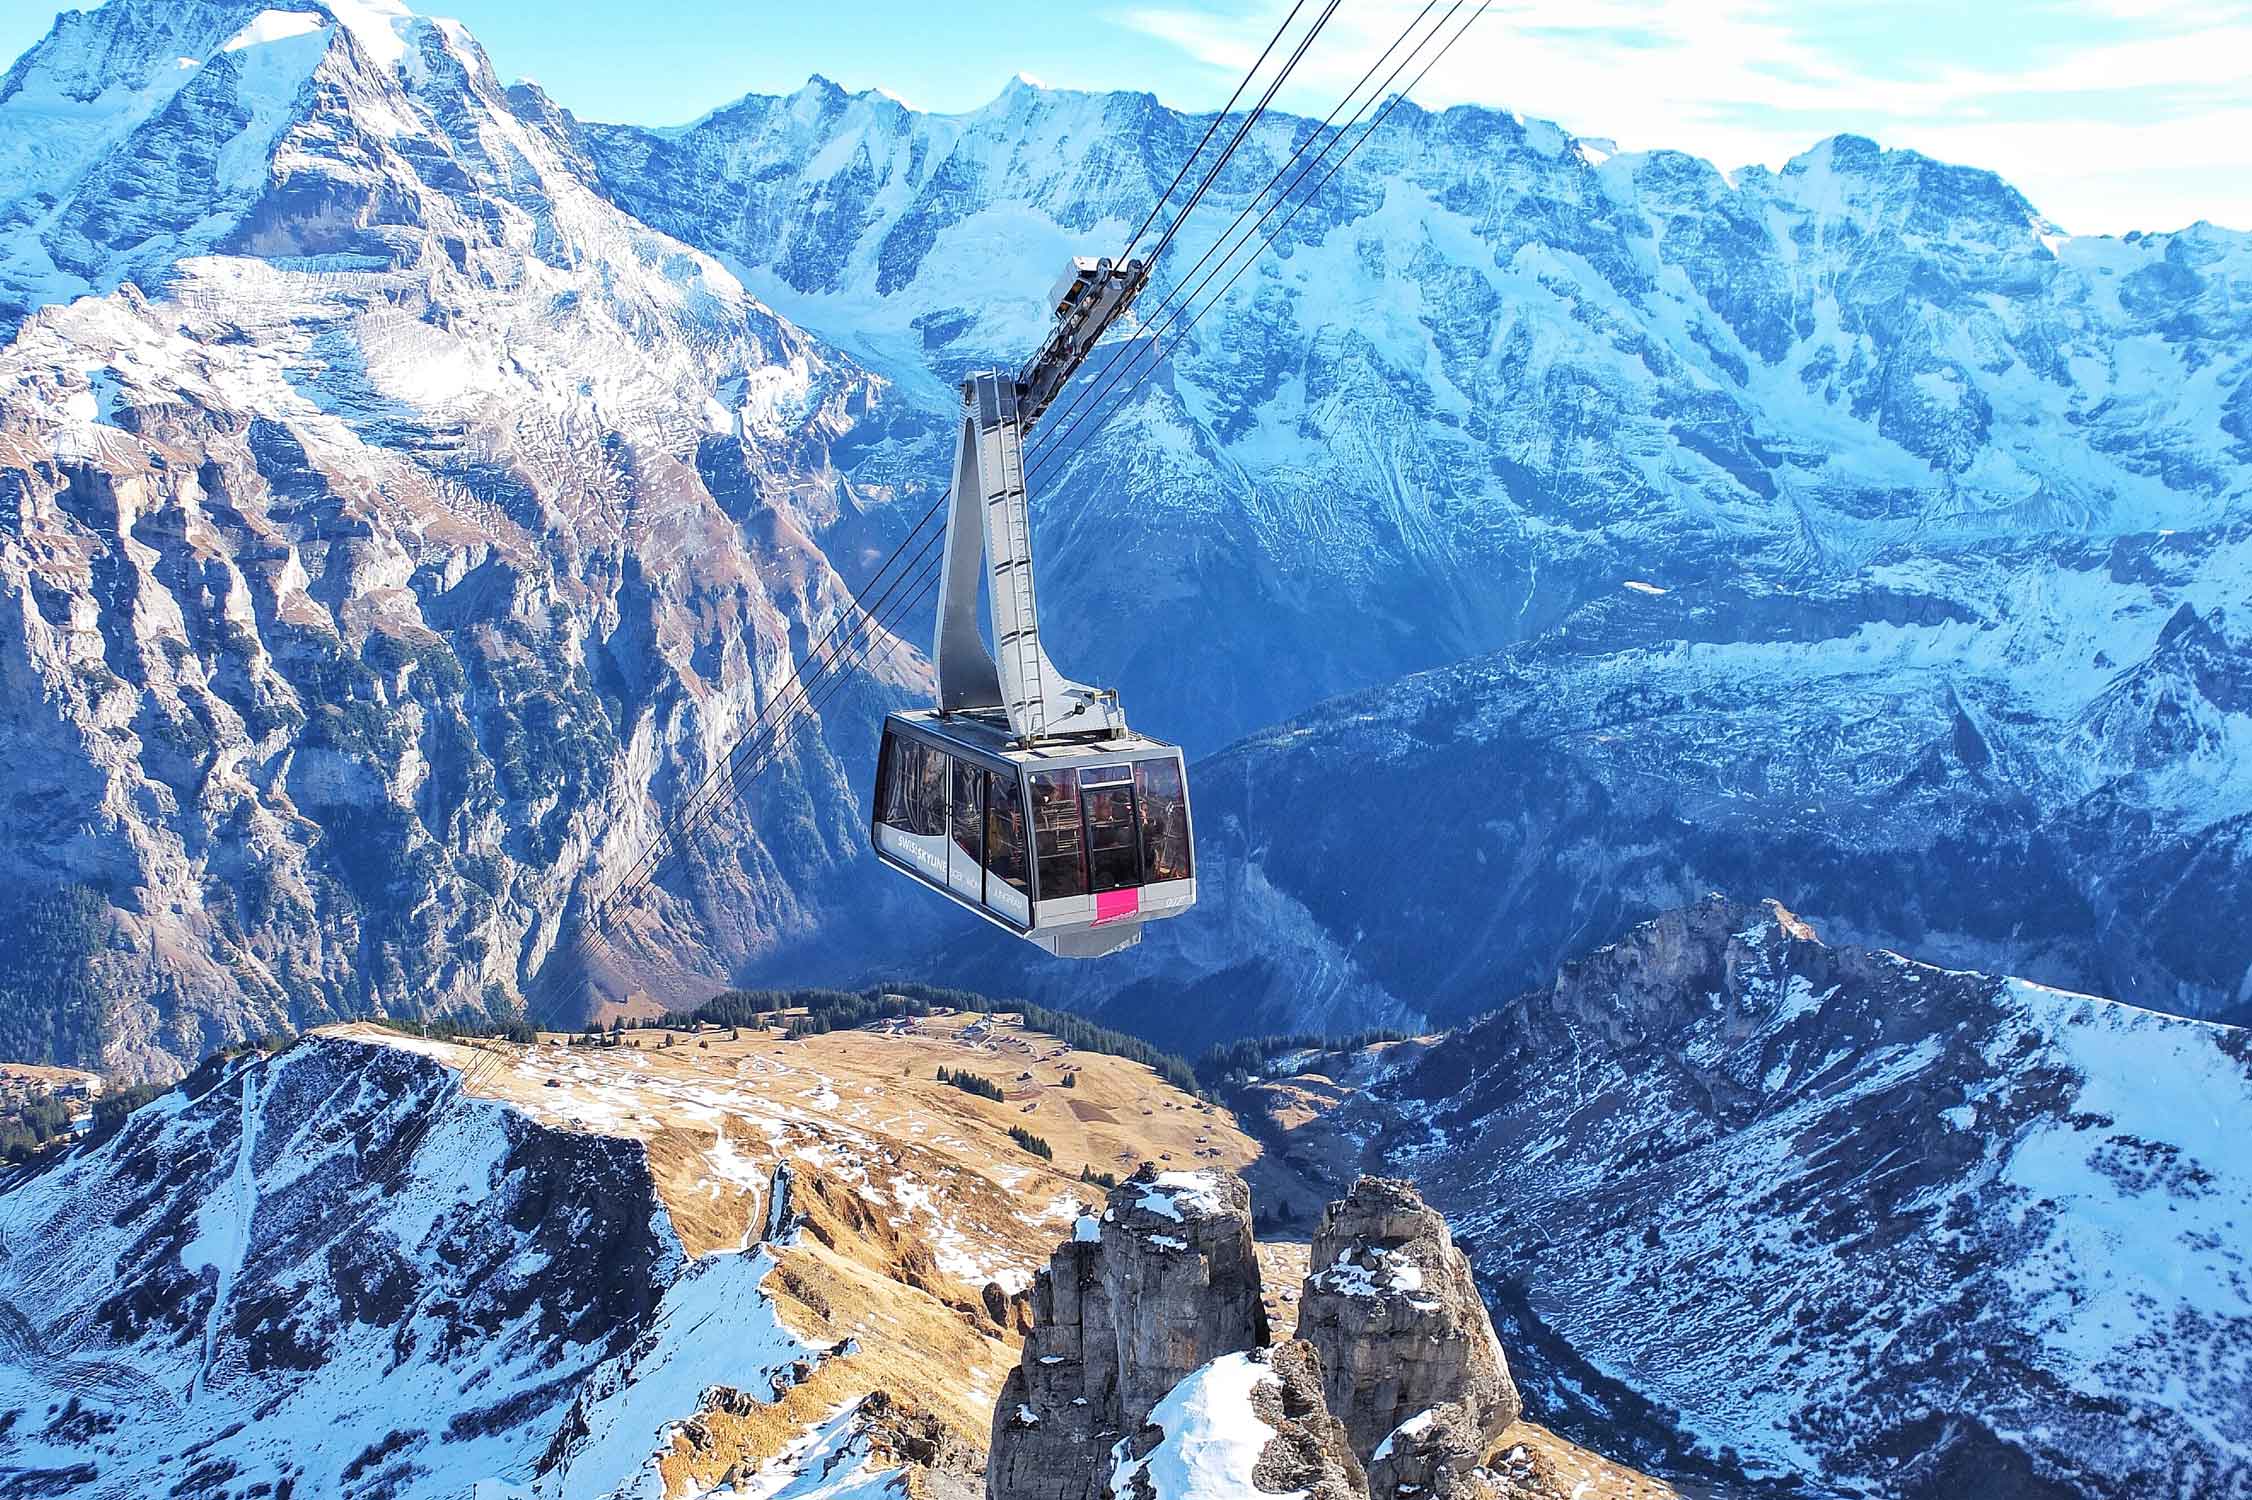 Bird's eye view of ski lift over Alps during winter